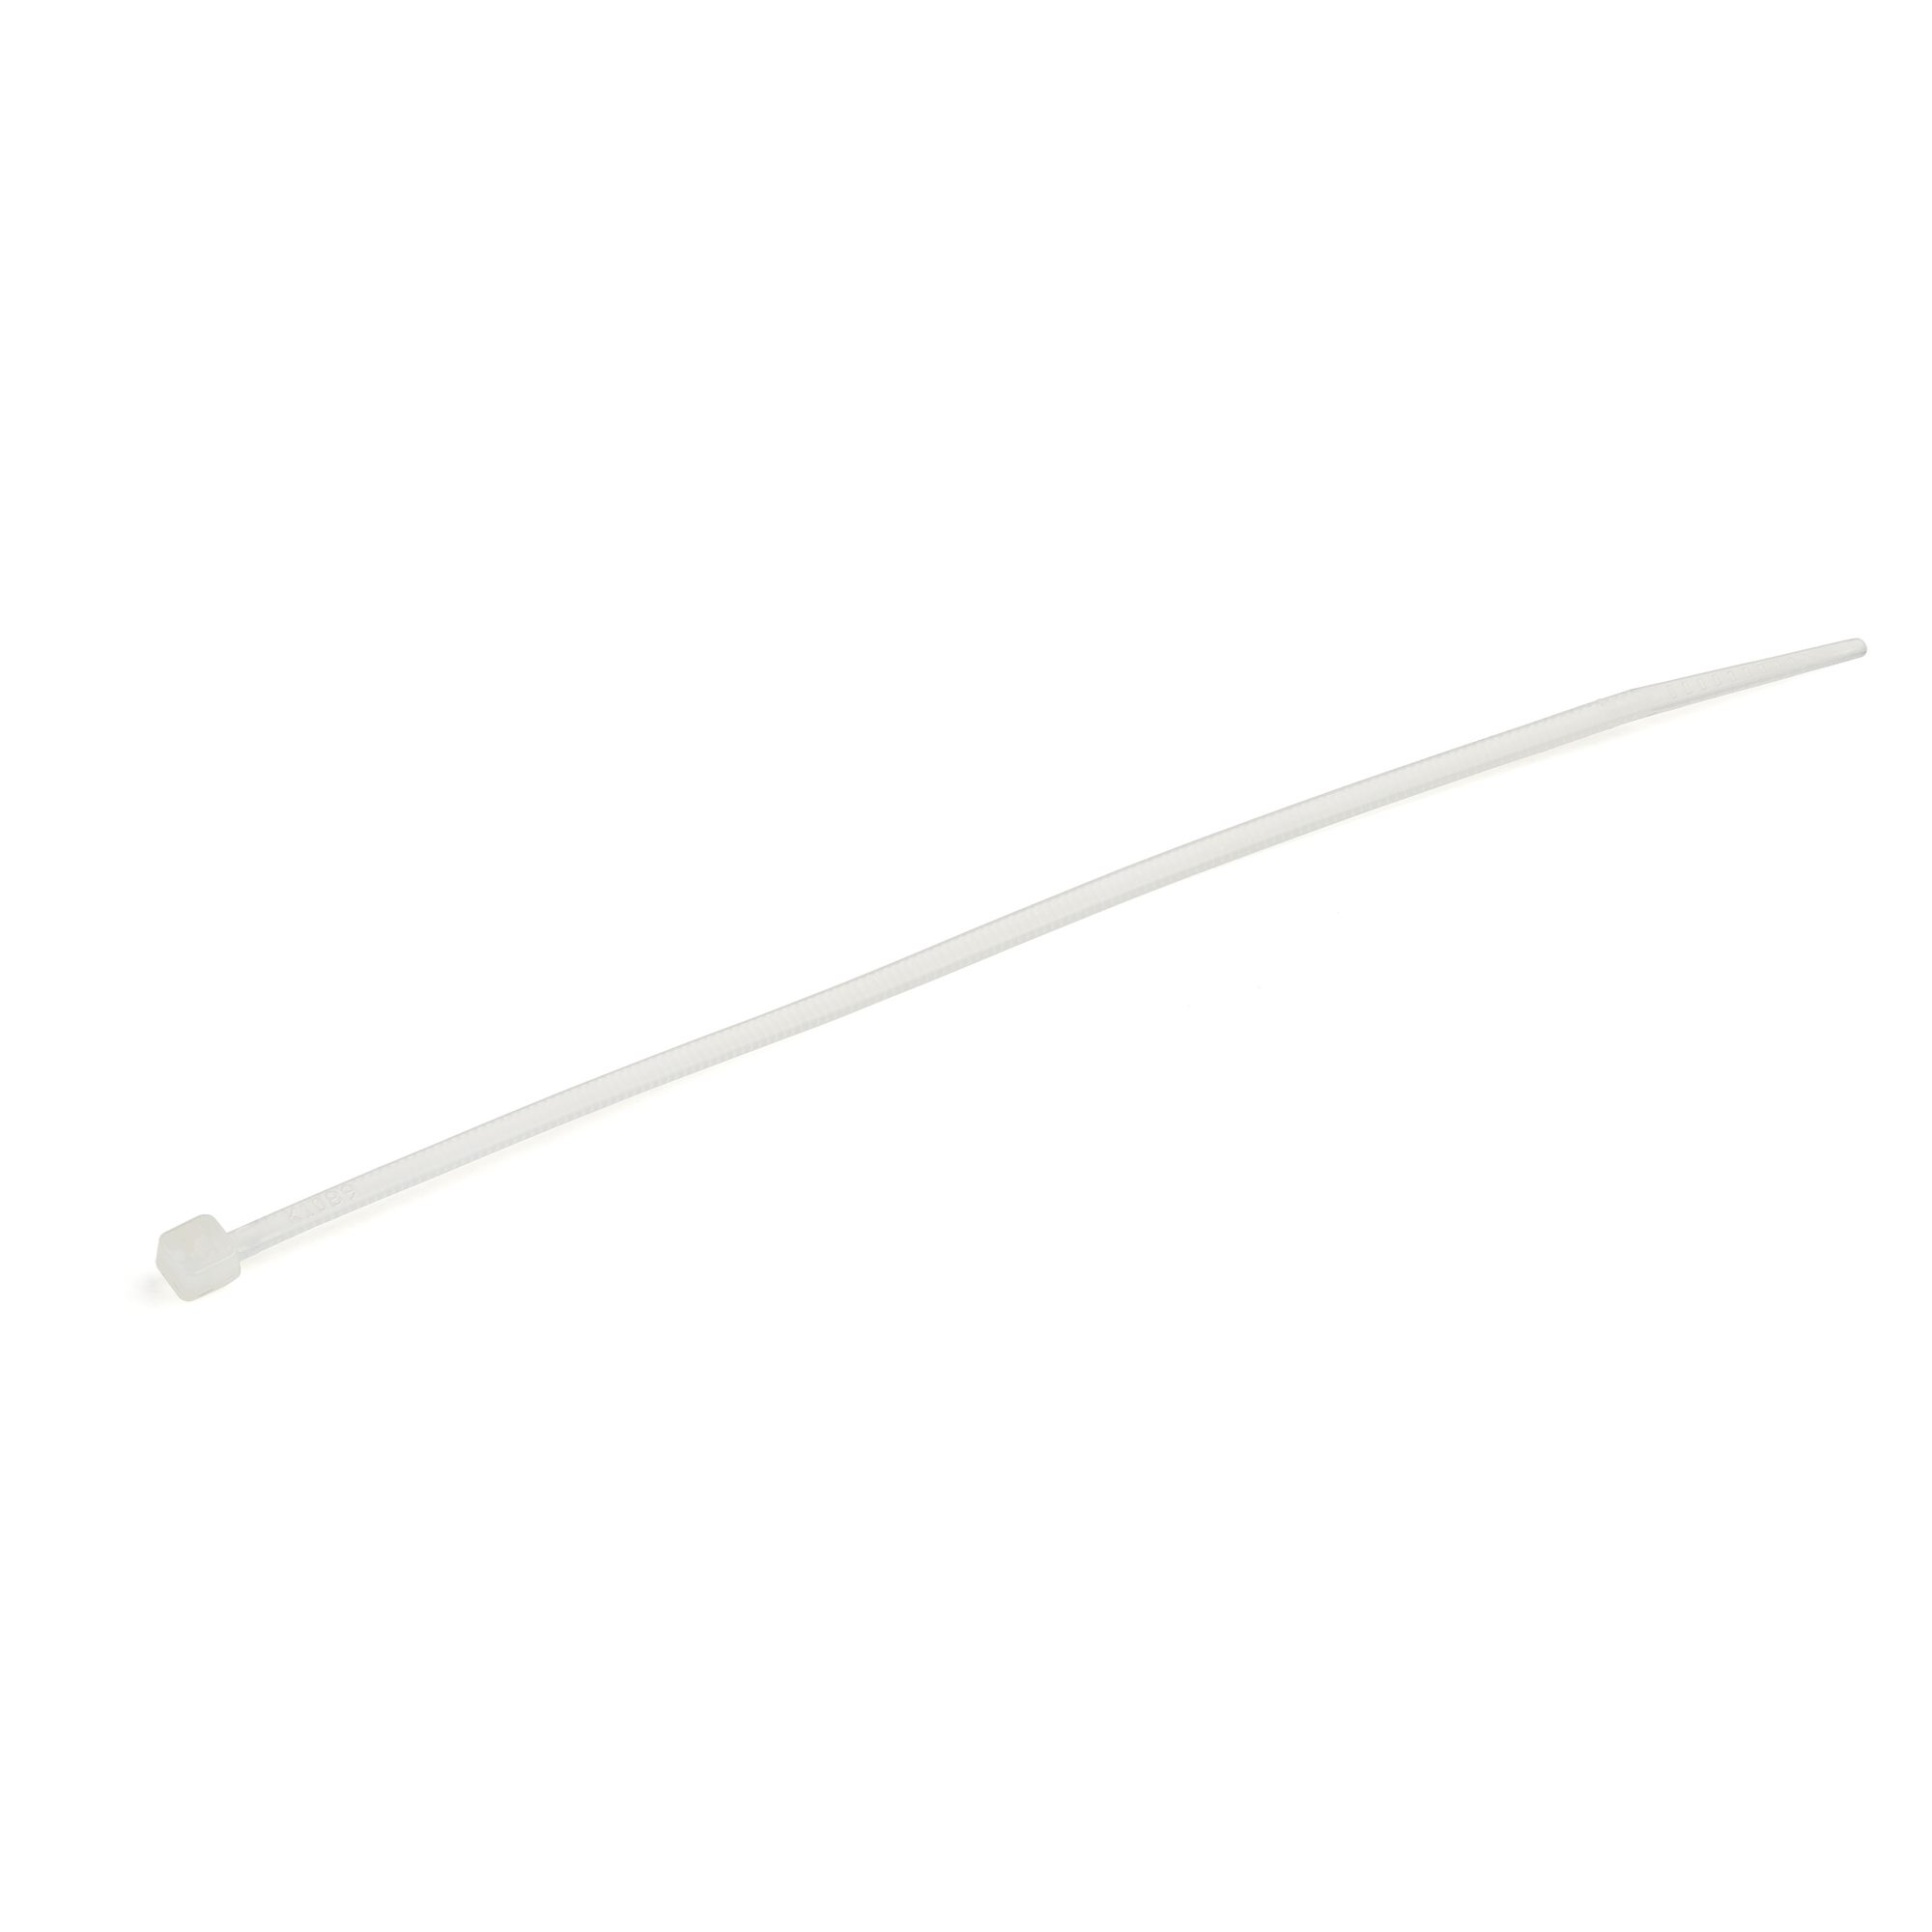 【CBMZT6N】100 PK 6" WHITE CABLE TIES